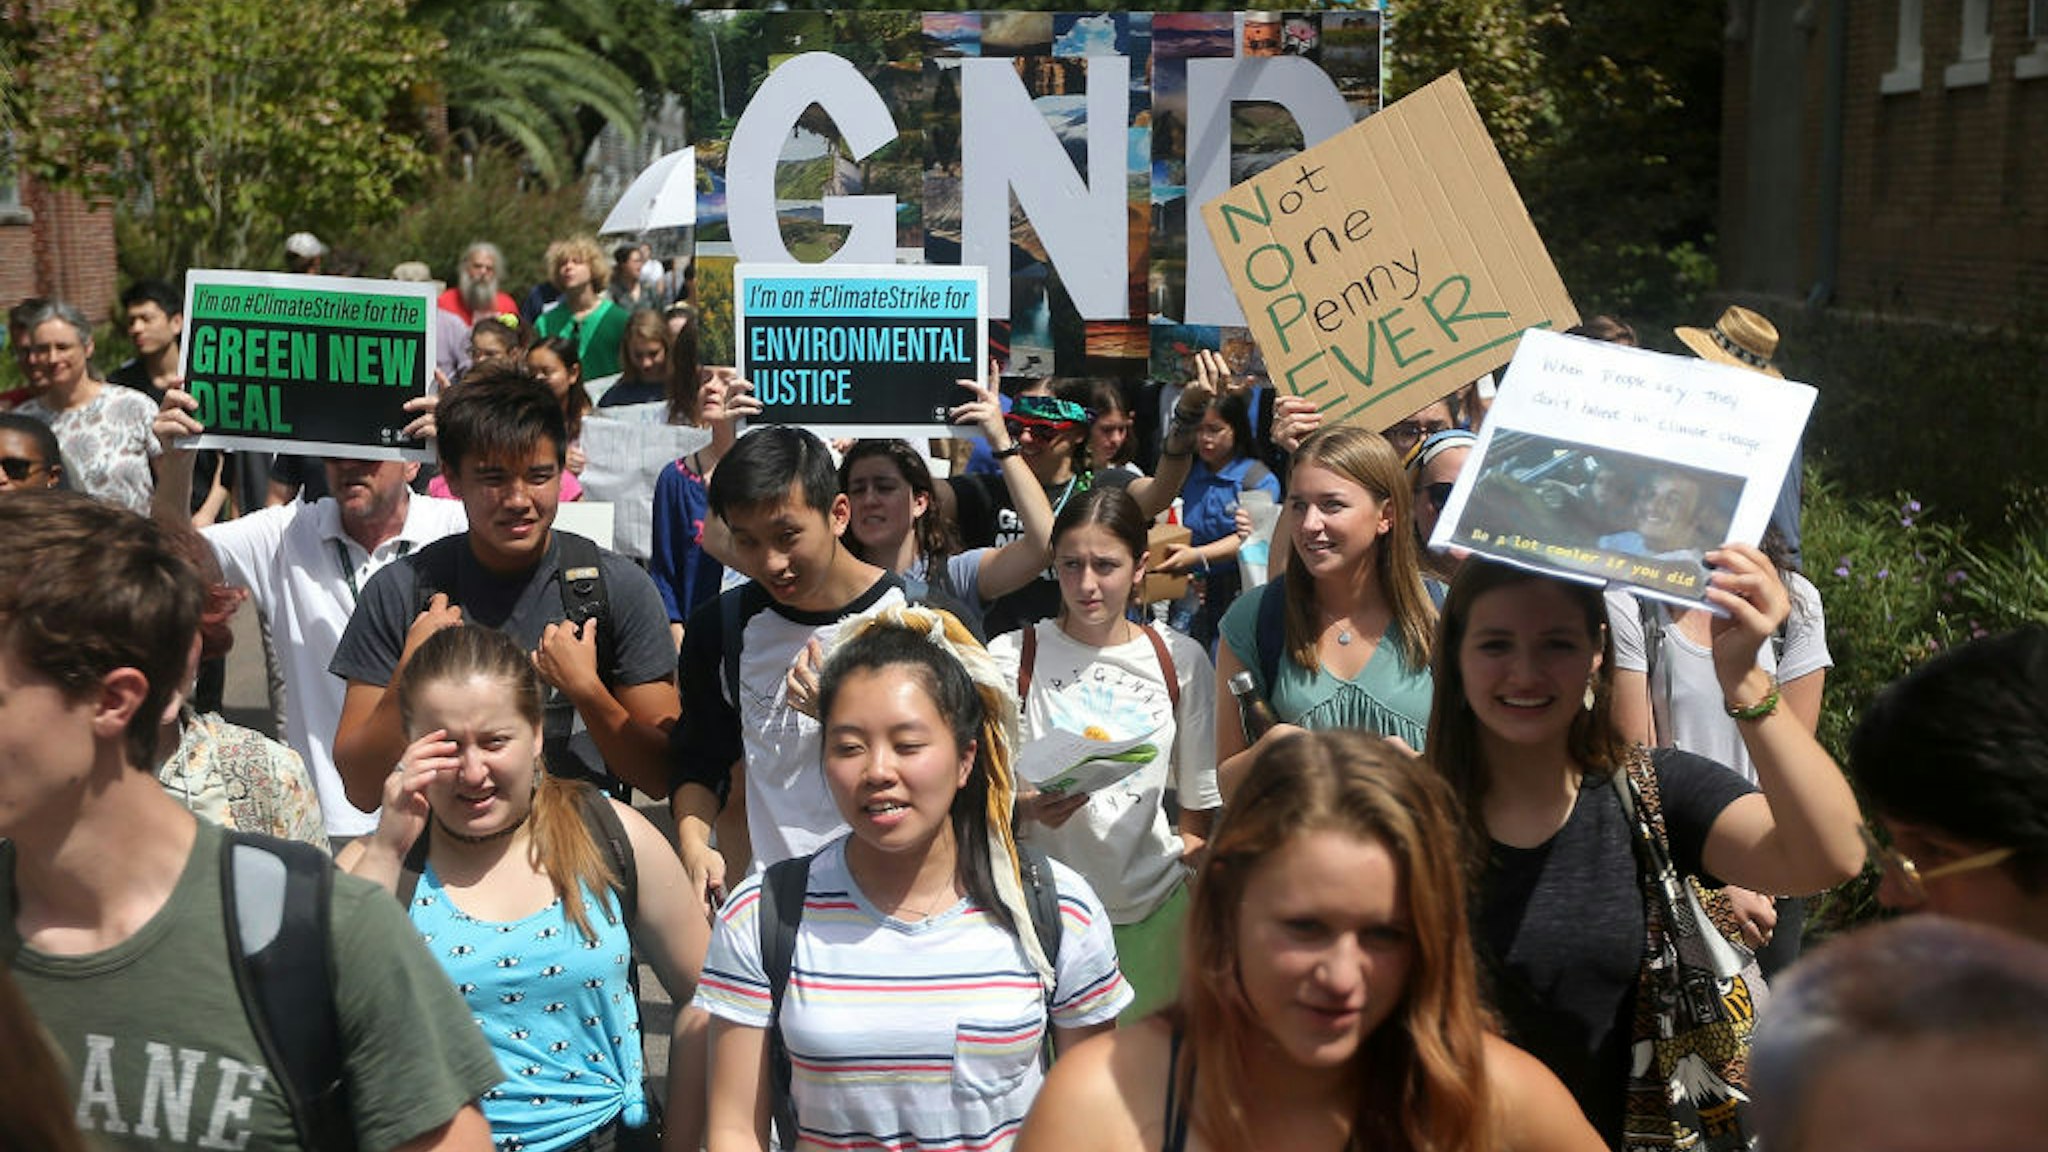 Students participate in a global climate strike at Tulane University on September 20, 2019 in New Orleans, Louisiana.